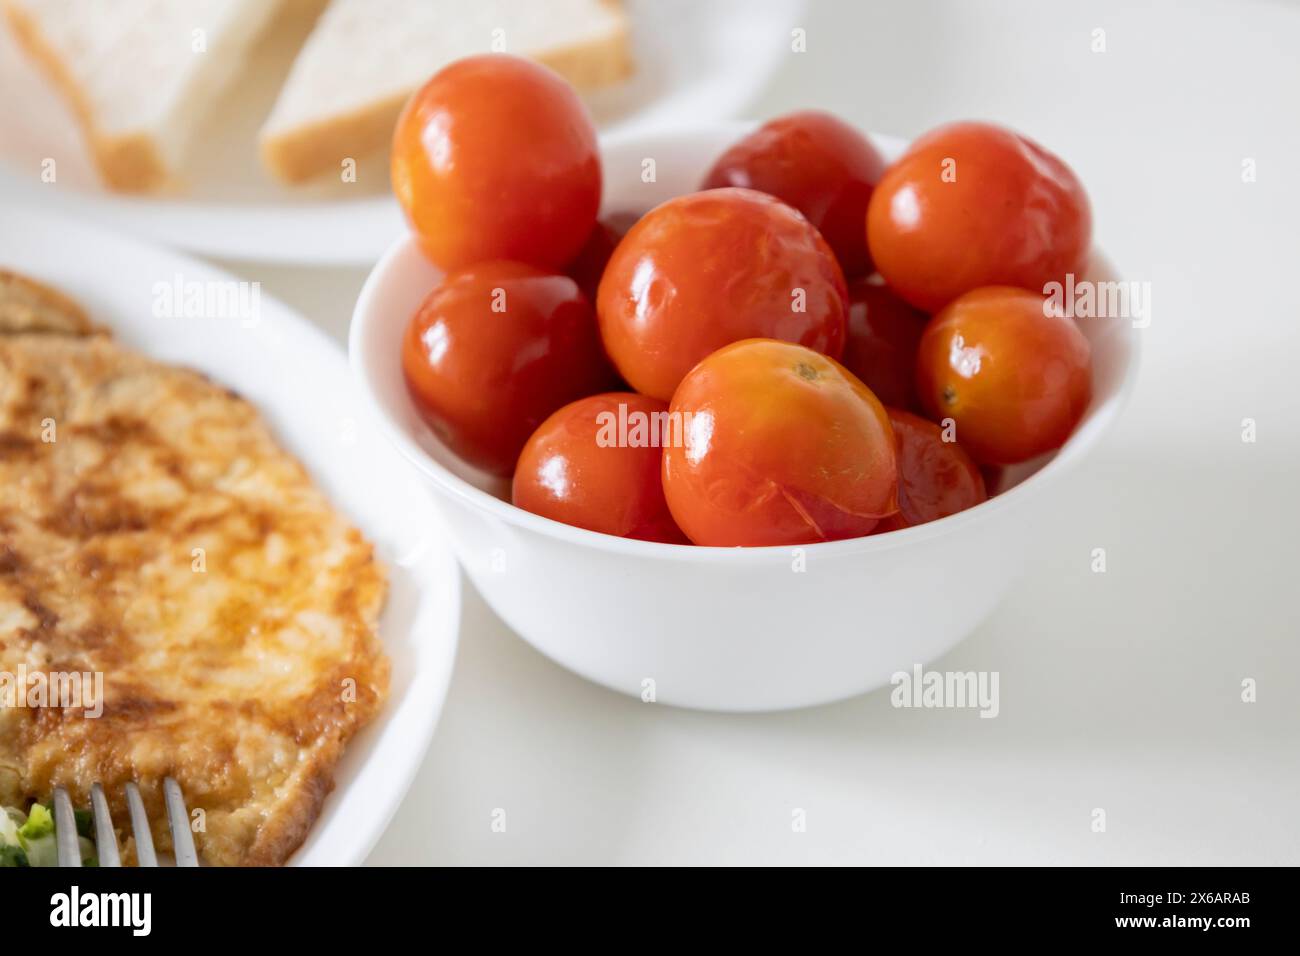 Red pickled tomatoes in a white plate close-up on a table Stock Photo